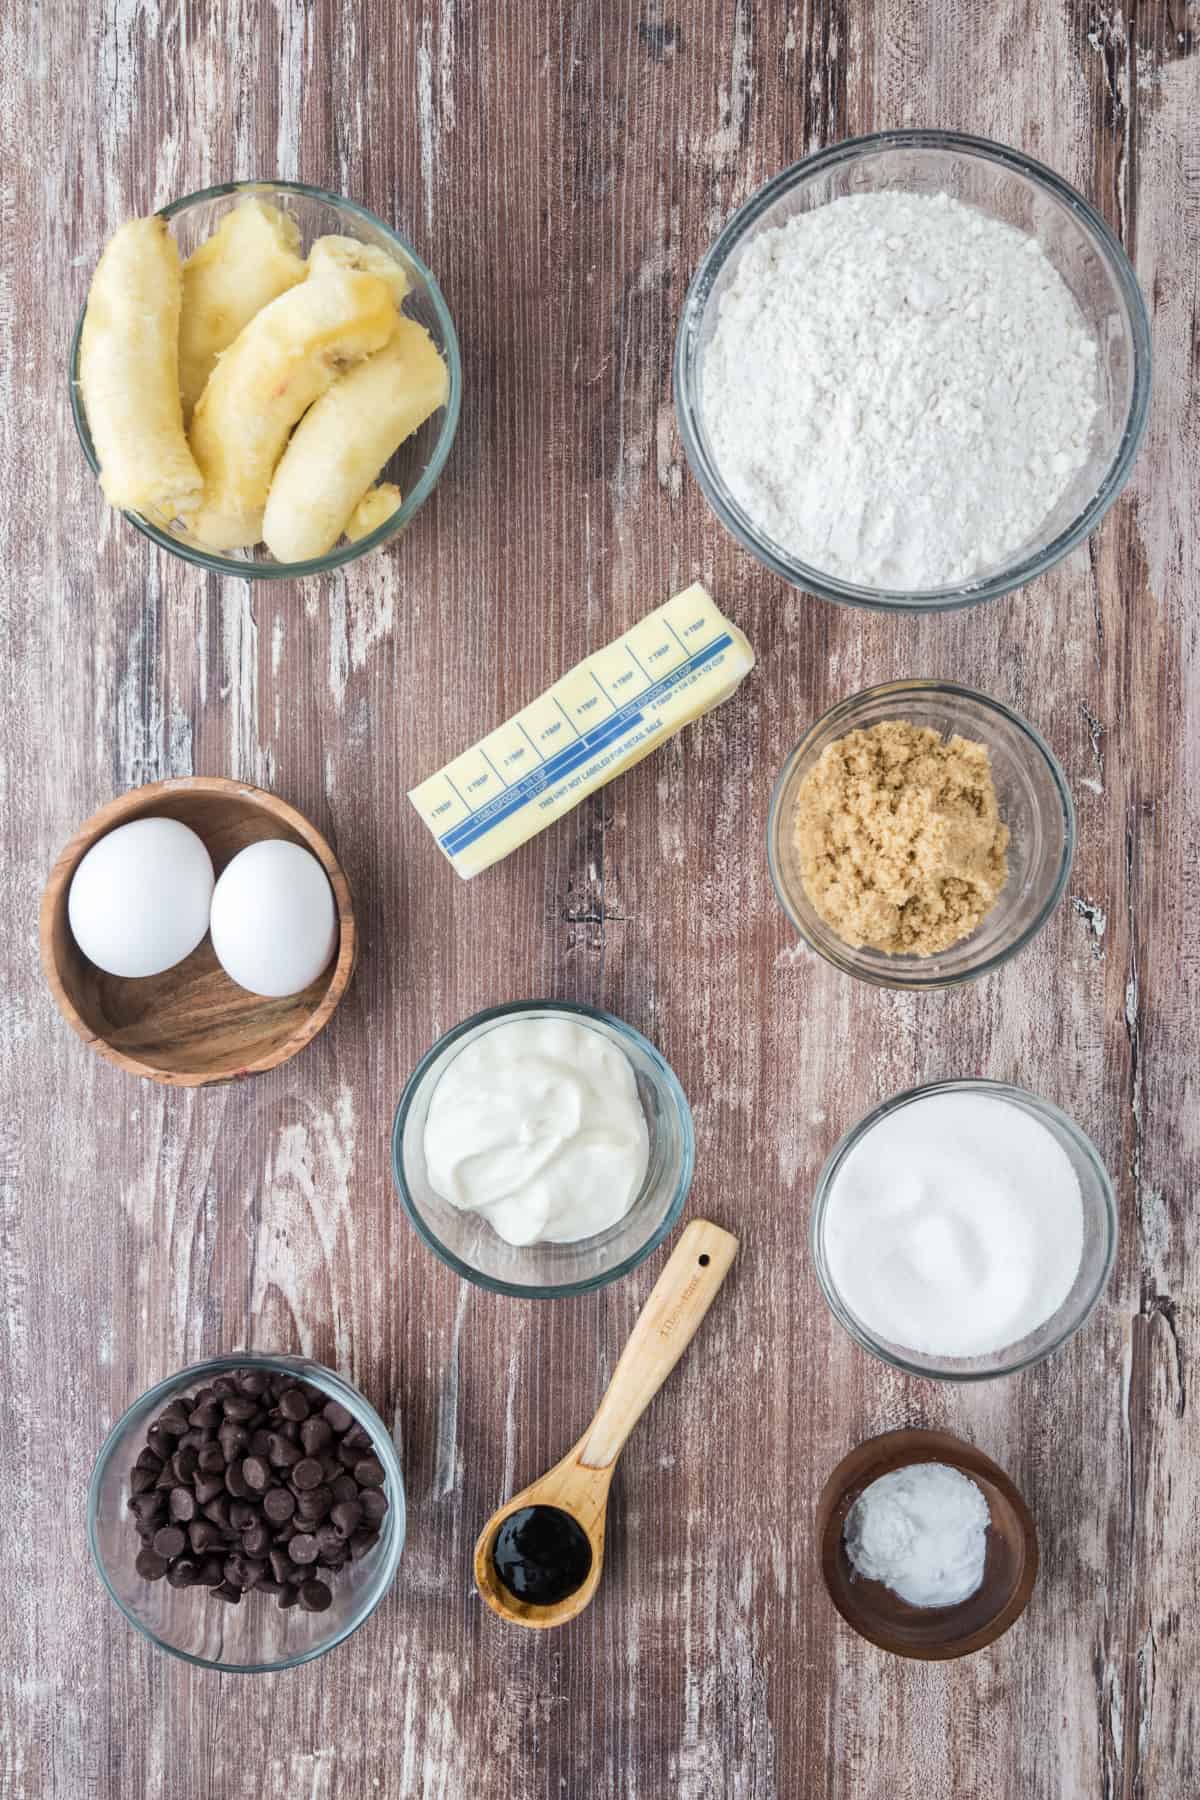 Ingredients needed to make Chocolate Chip Banana Bread.